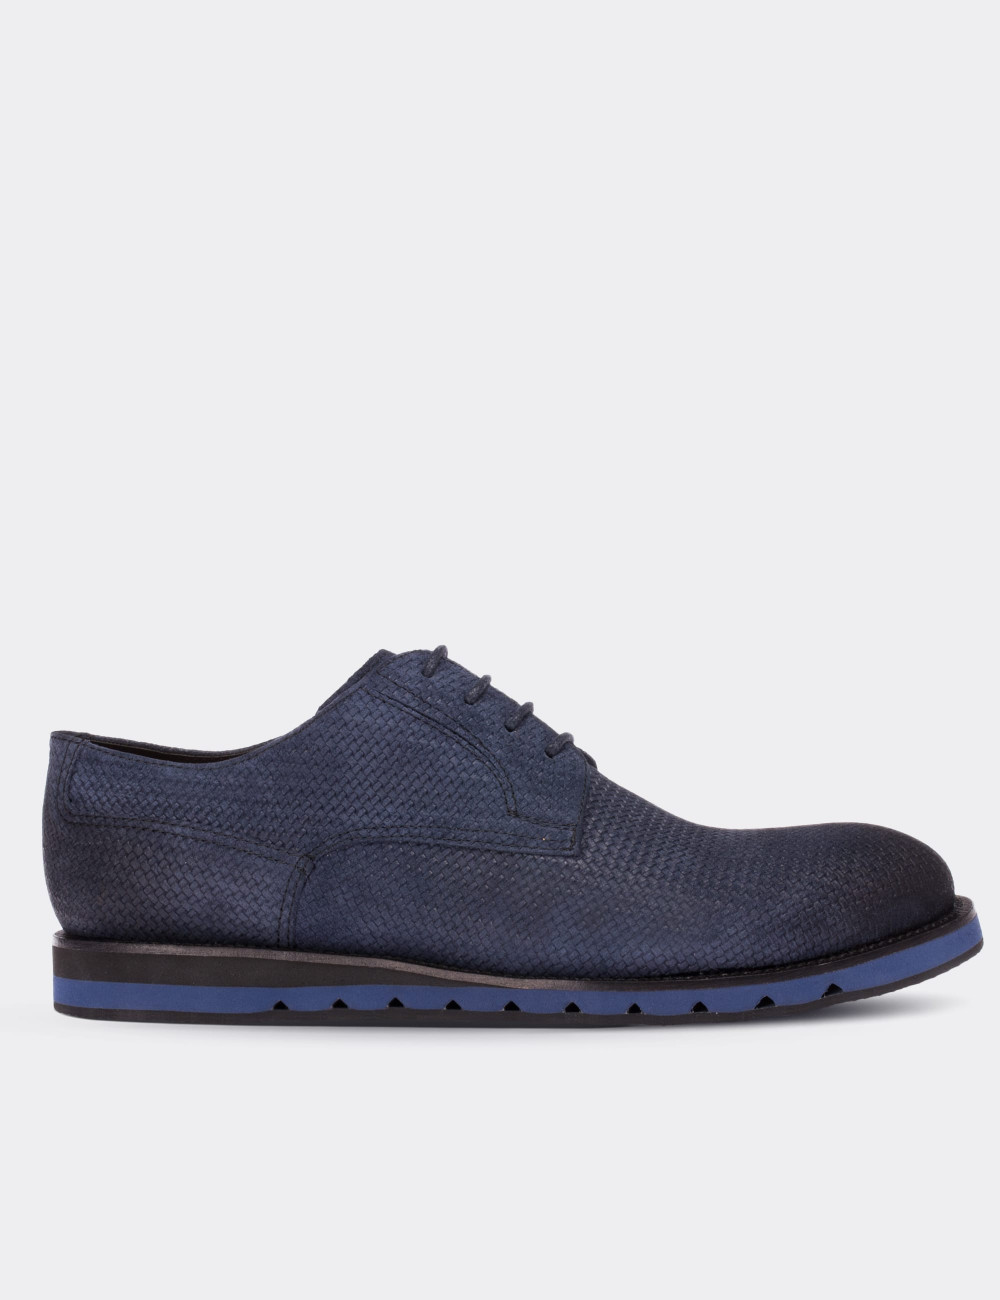 Navy Suede Leather Lace-up Shoes - 01294MLCVE16